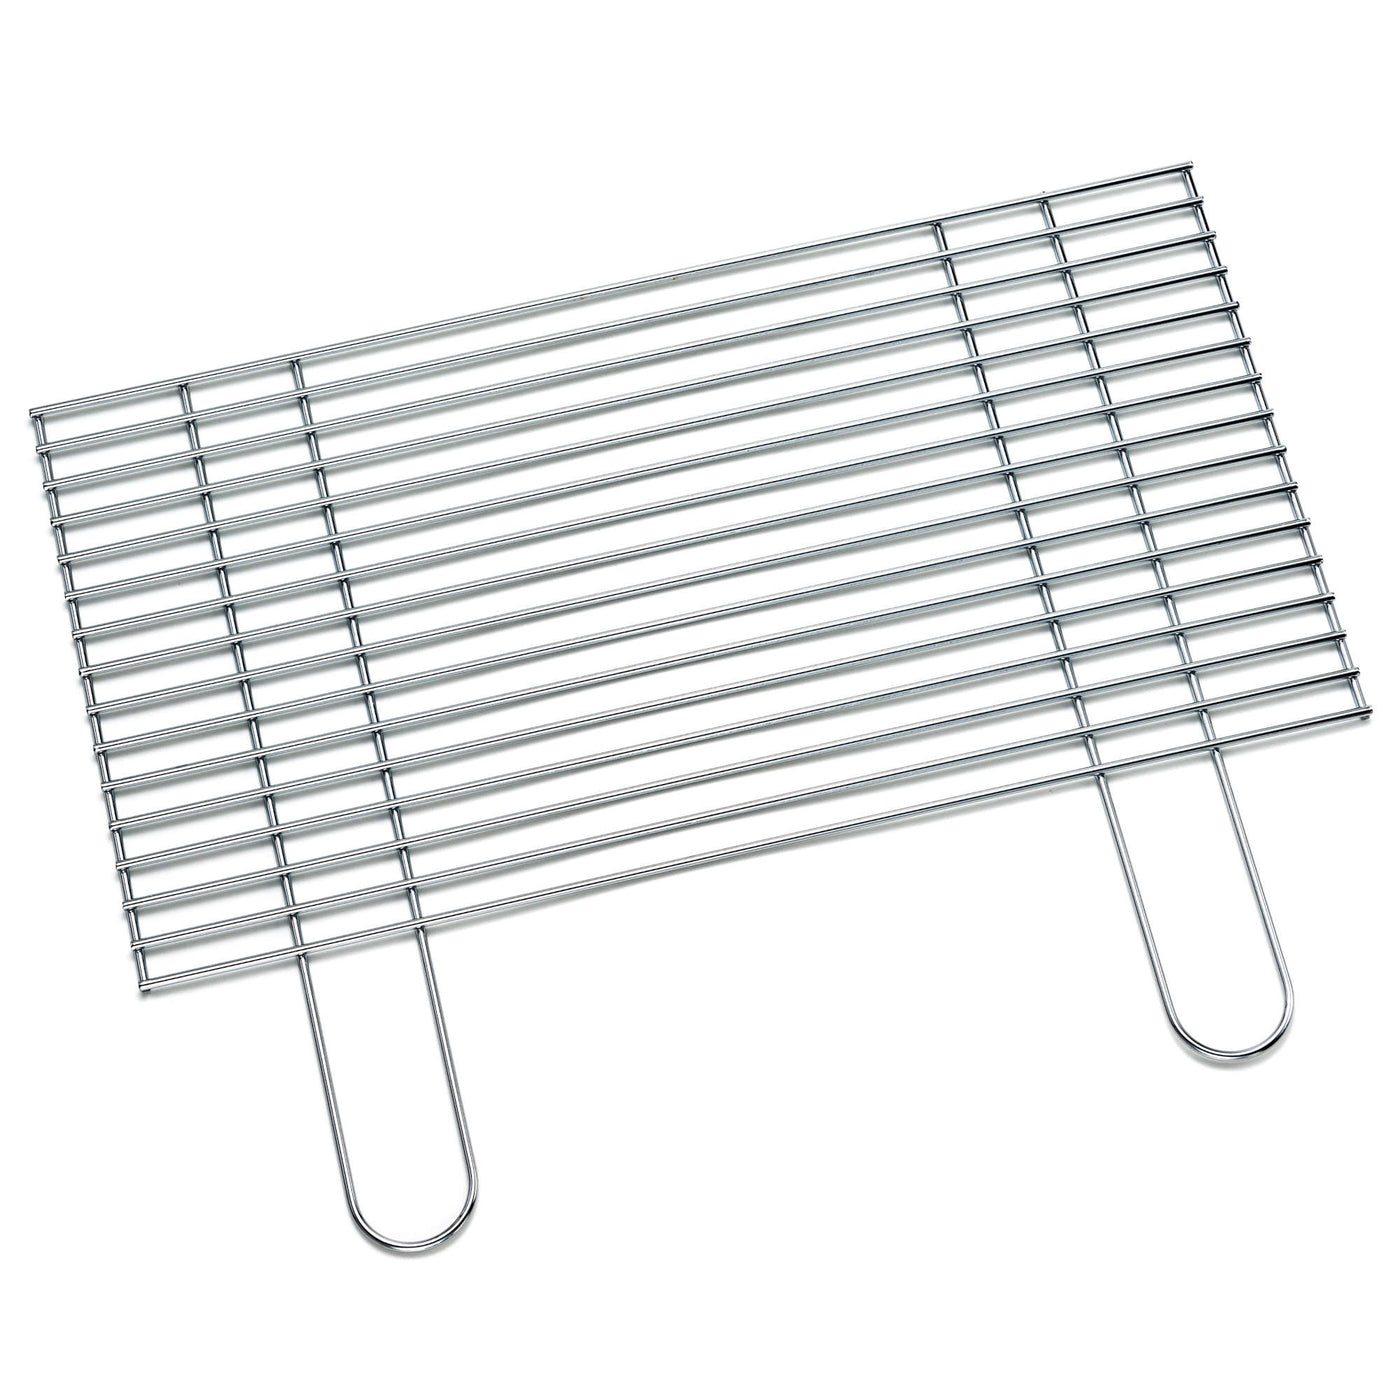 Grill grates square - grill surface 58 x 30 / 60 x 40 / 67 x 40 cm